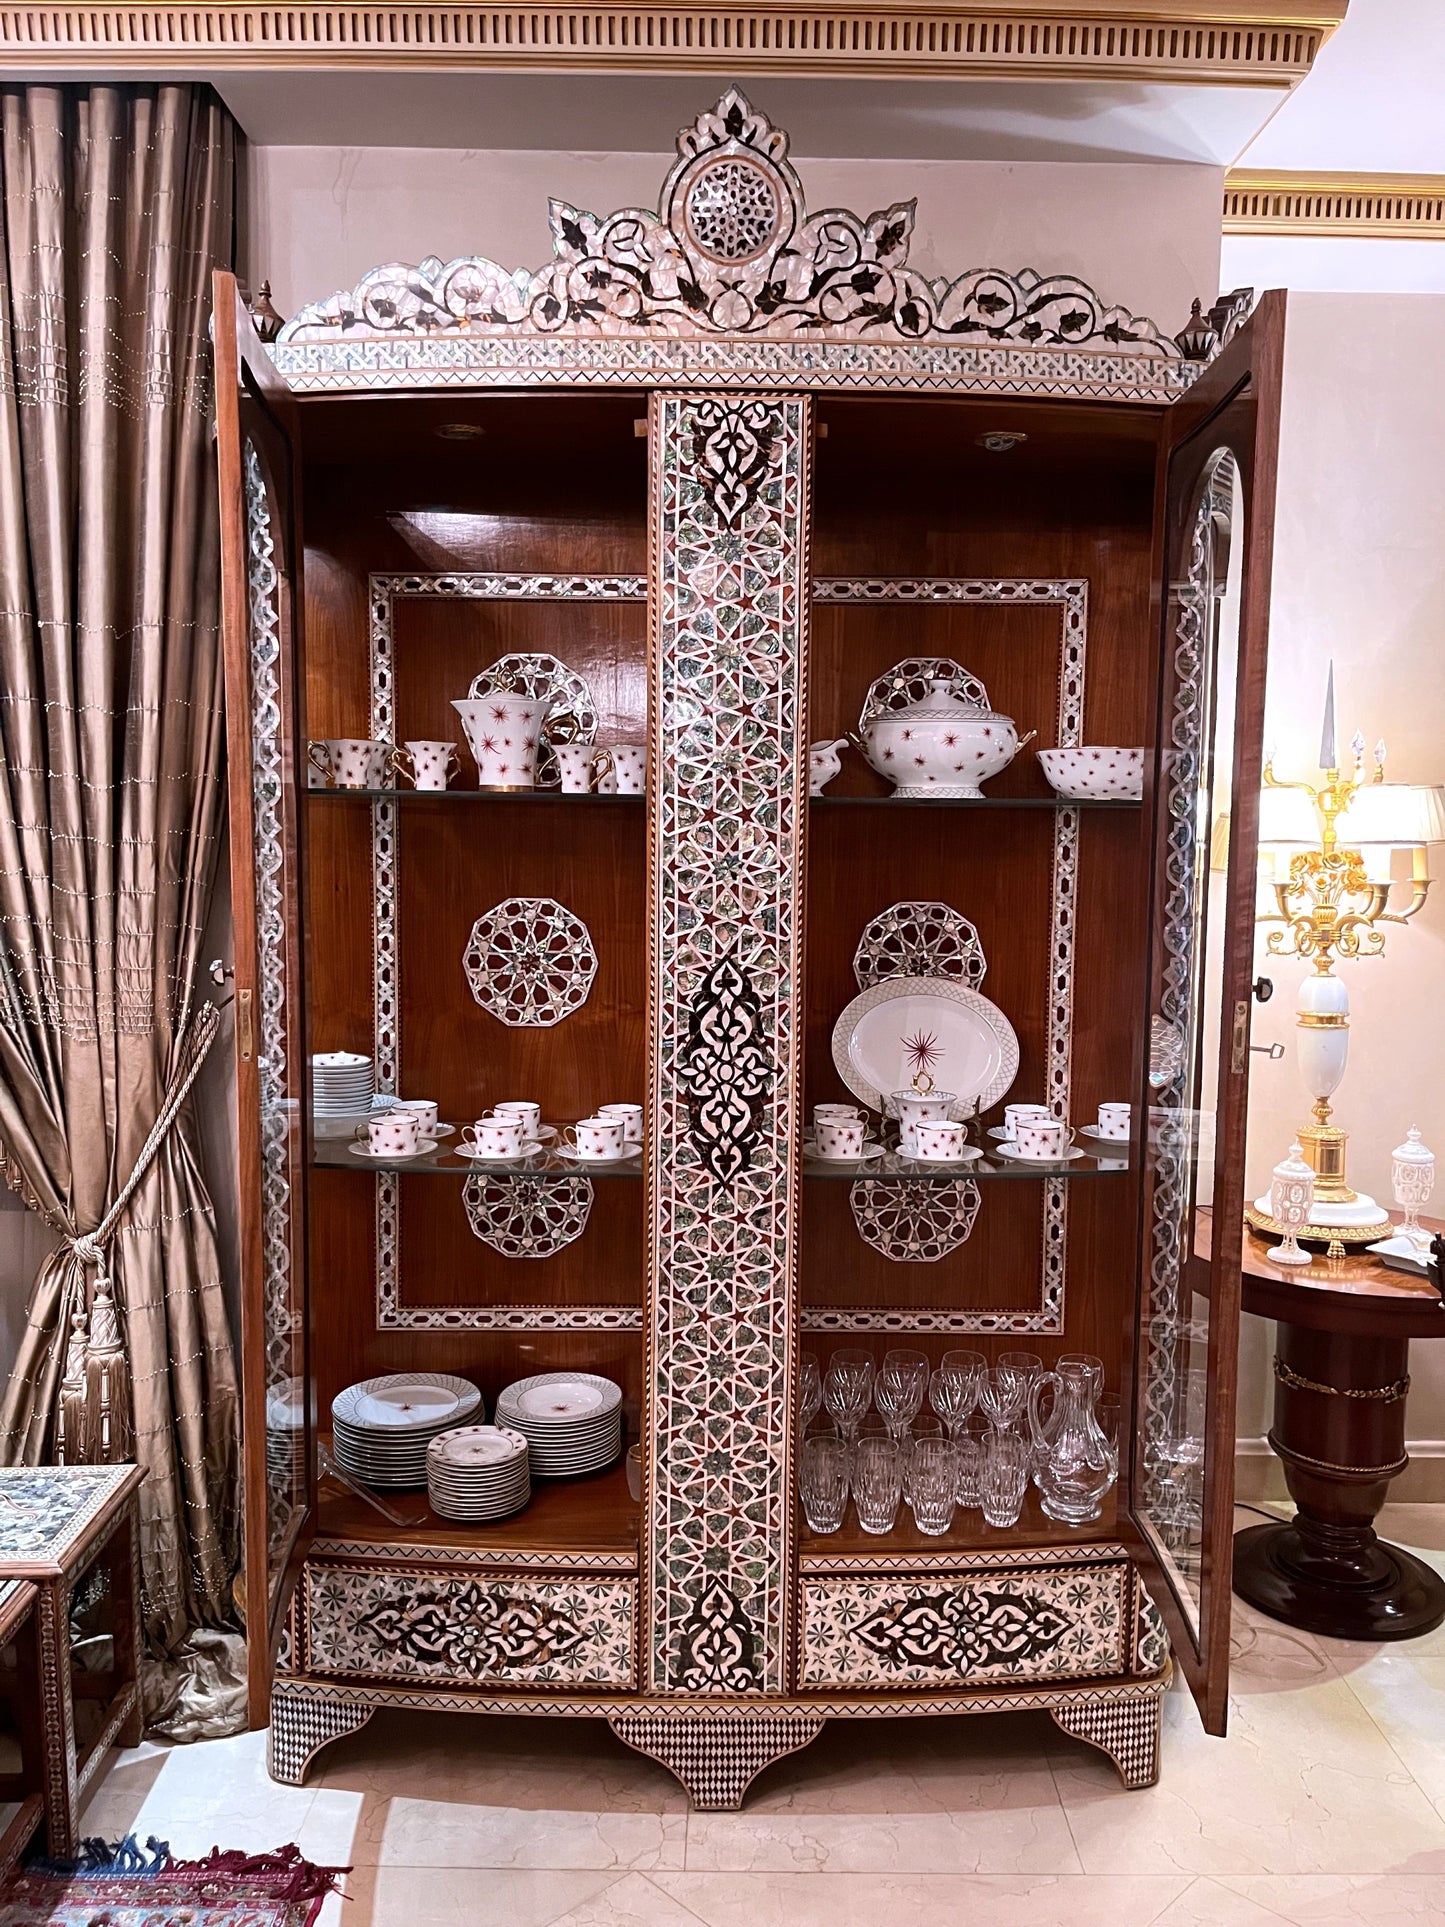 The Sultans Cabinet